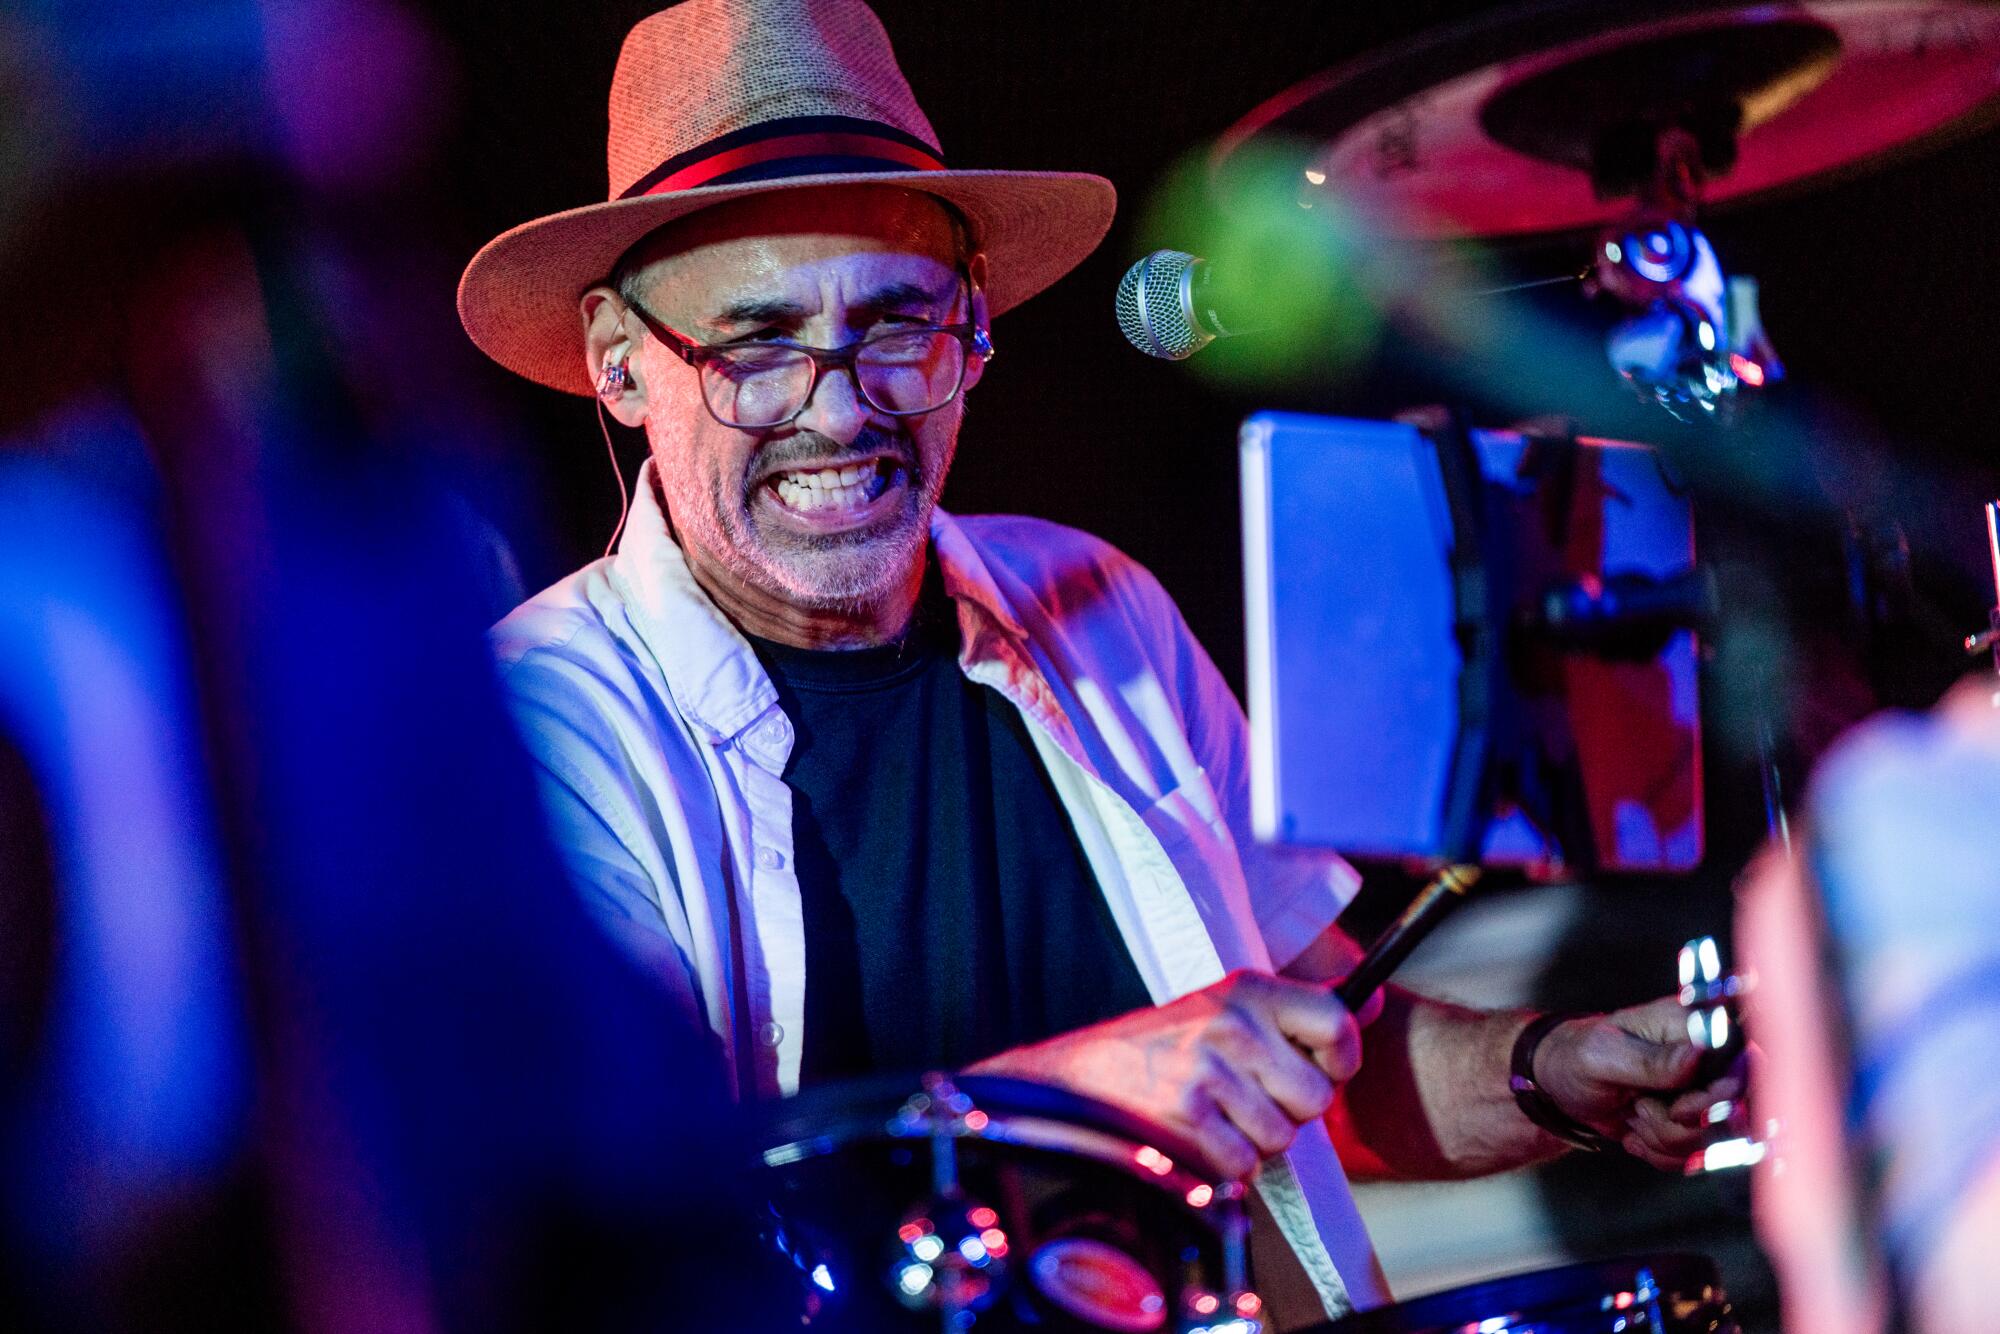 A man wearing a hat plays the drums.